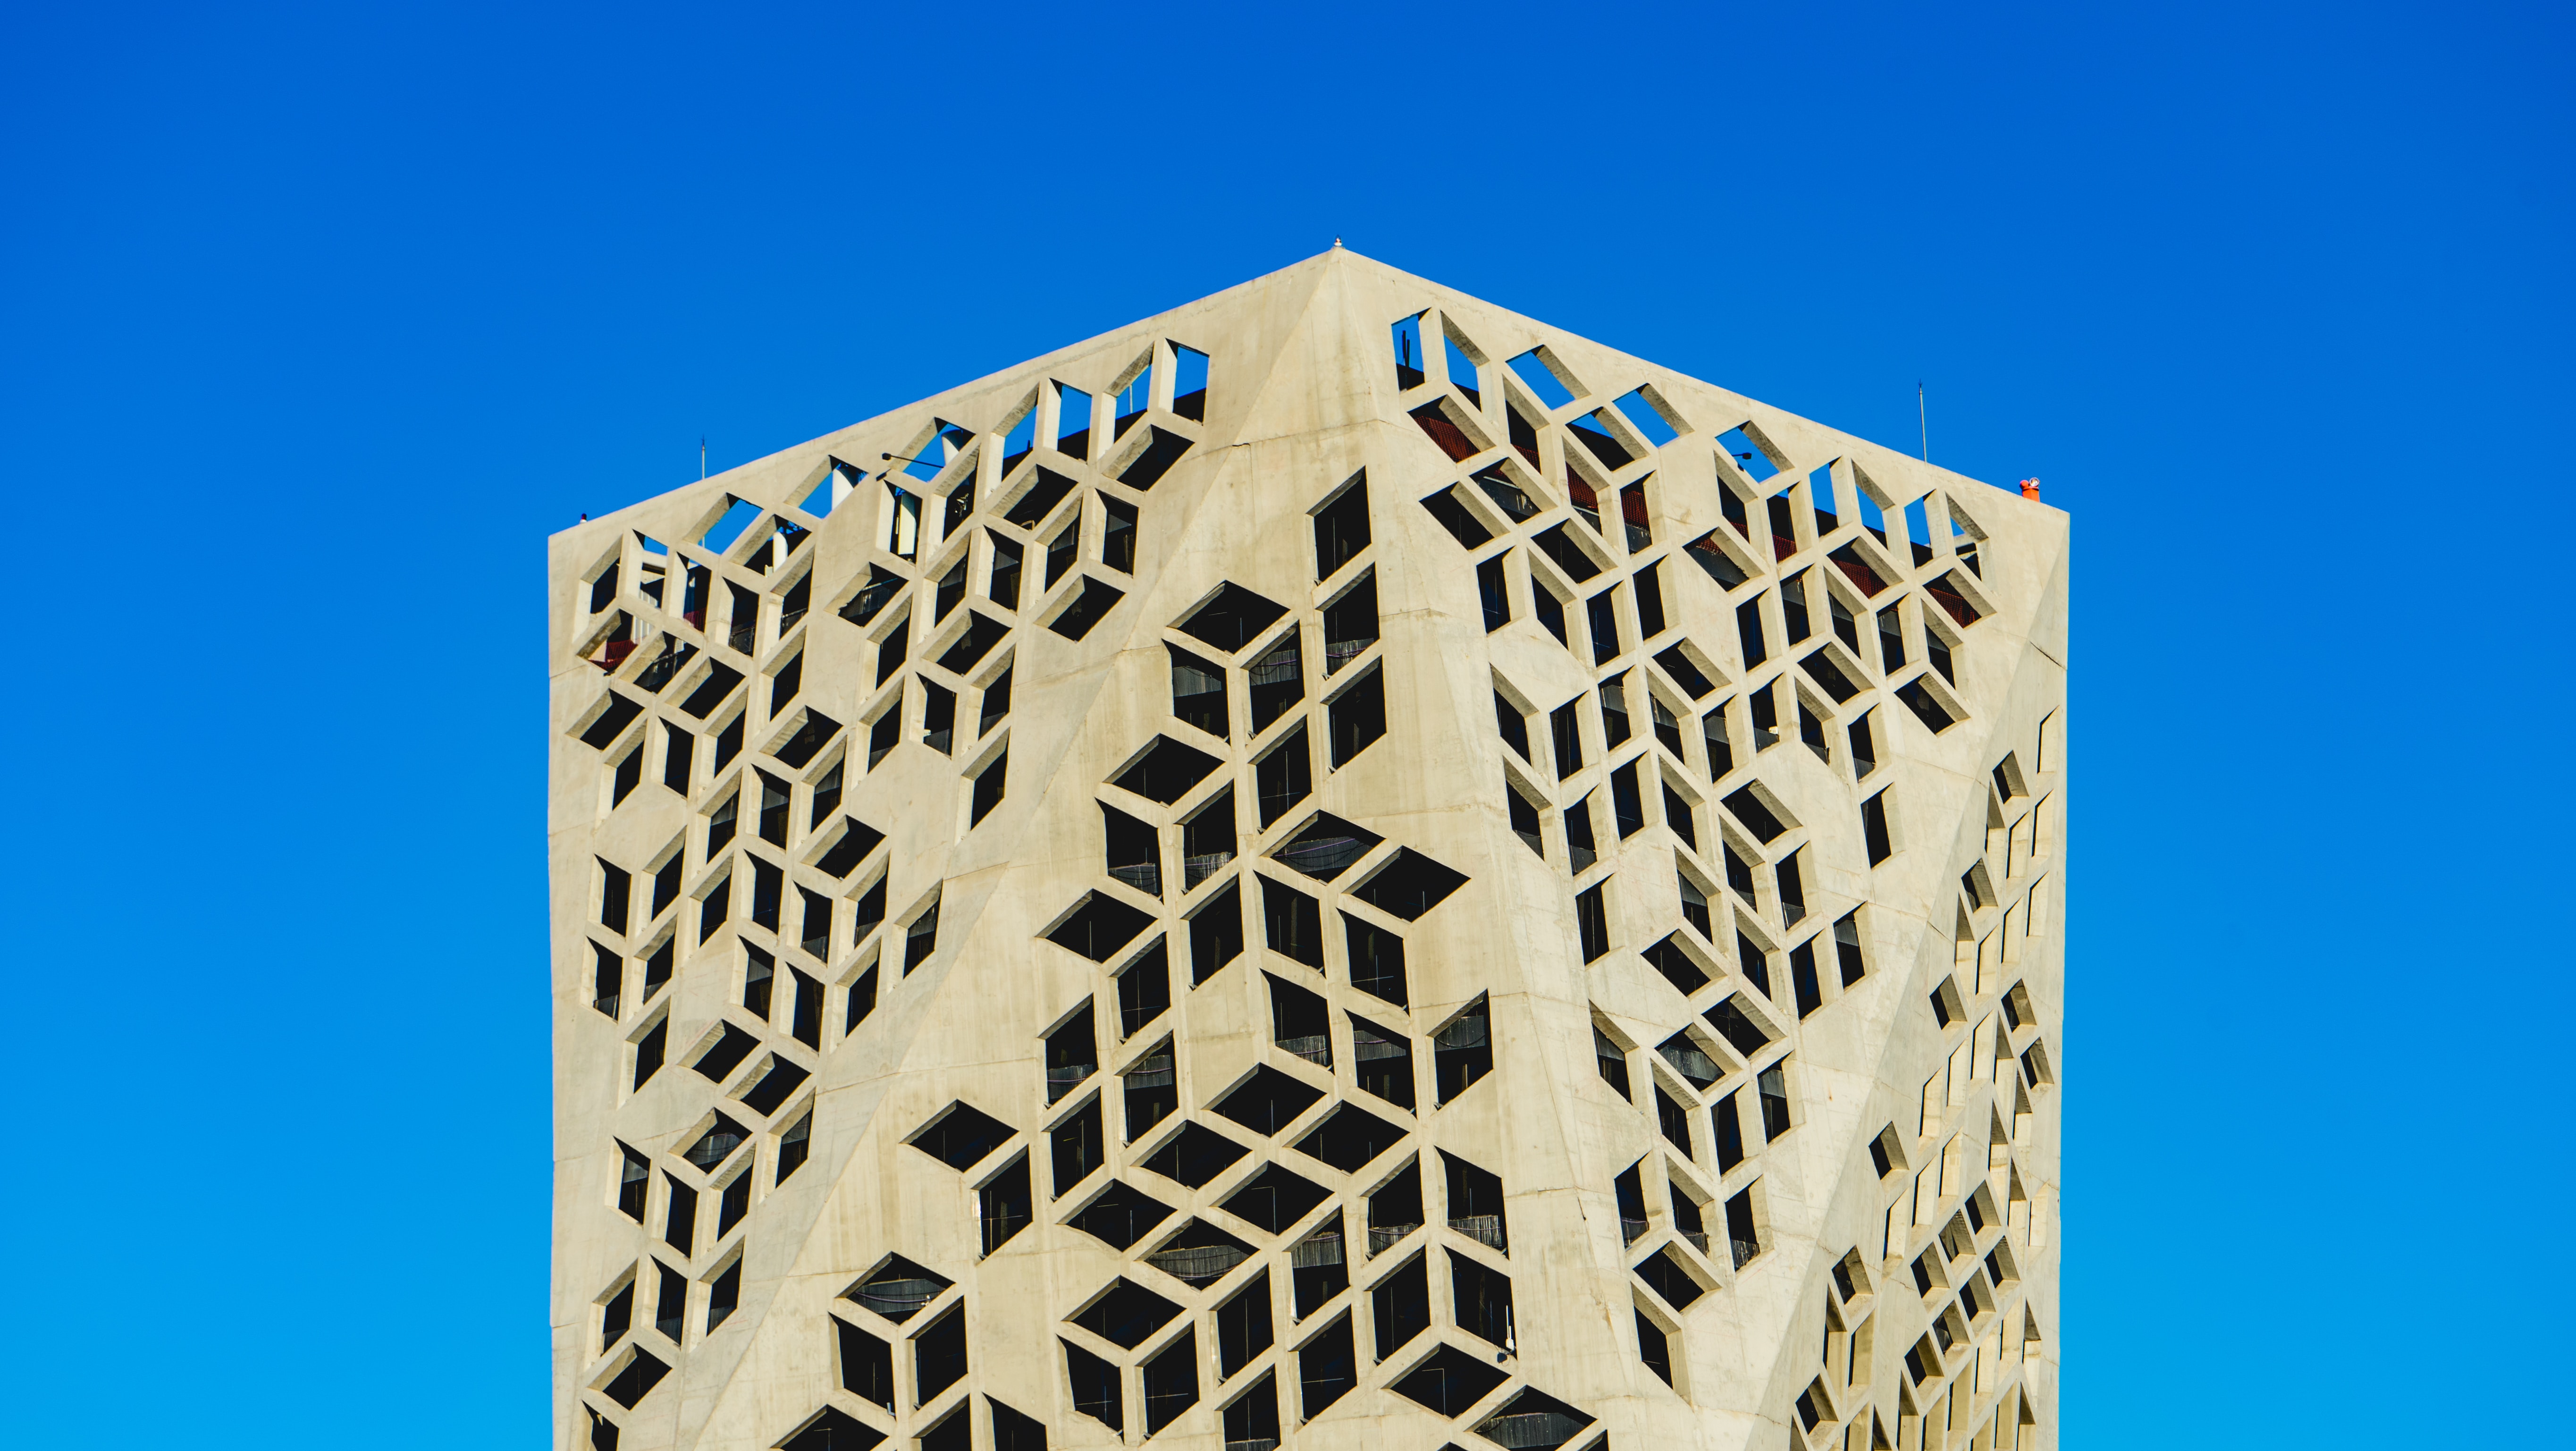 A tall building adorned with intricate geometric designs.